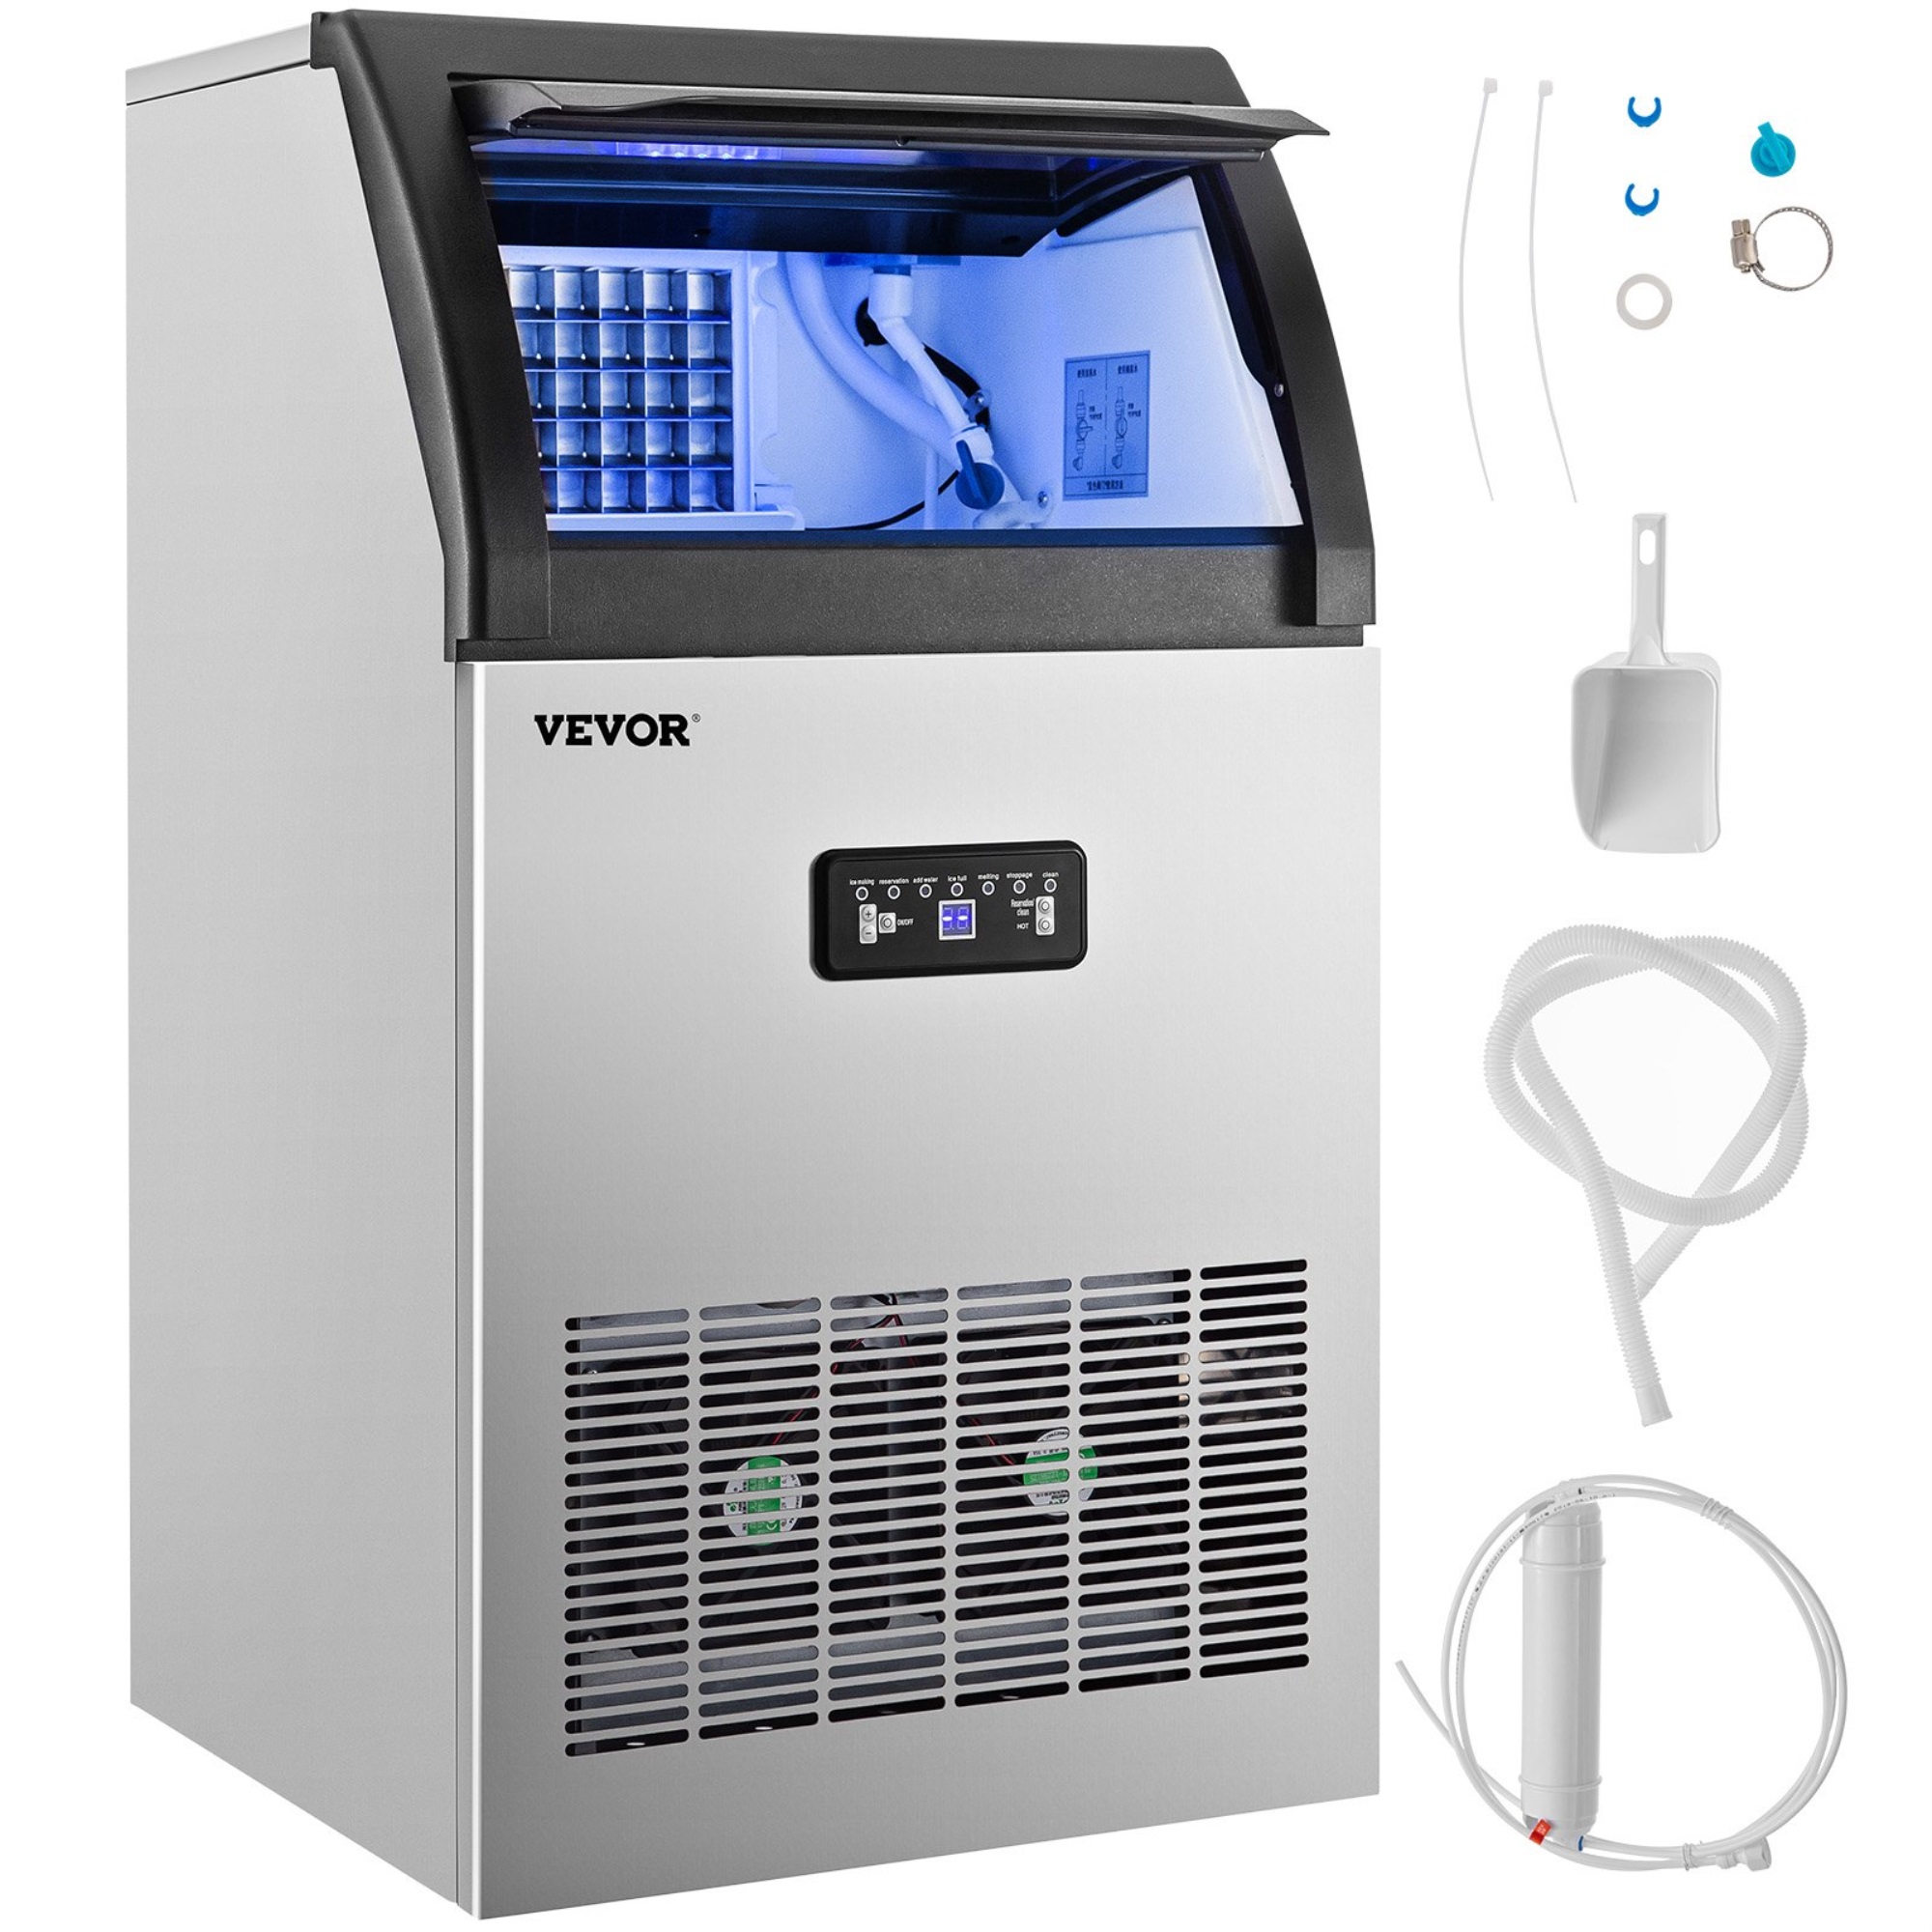 Vevor 155 Lbs Built-in Commercial Ice Maker Ice Cube Machine Transparent Window